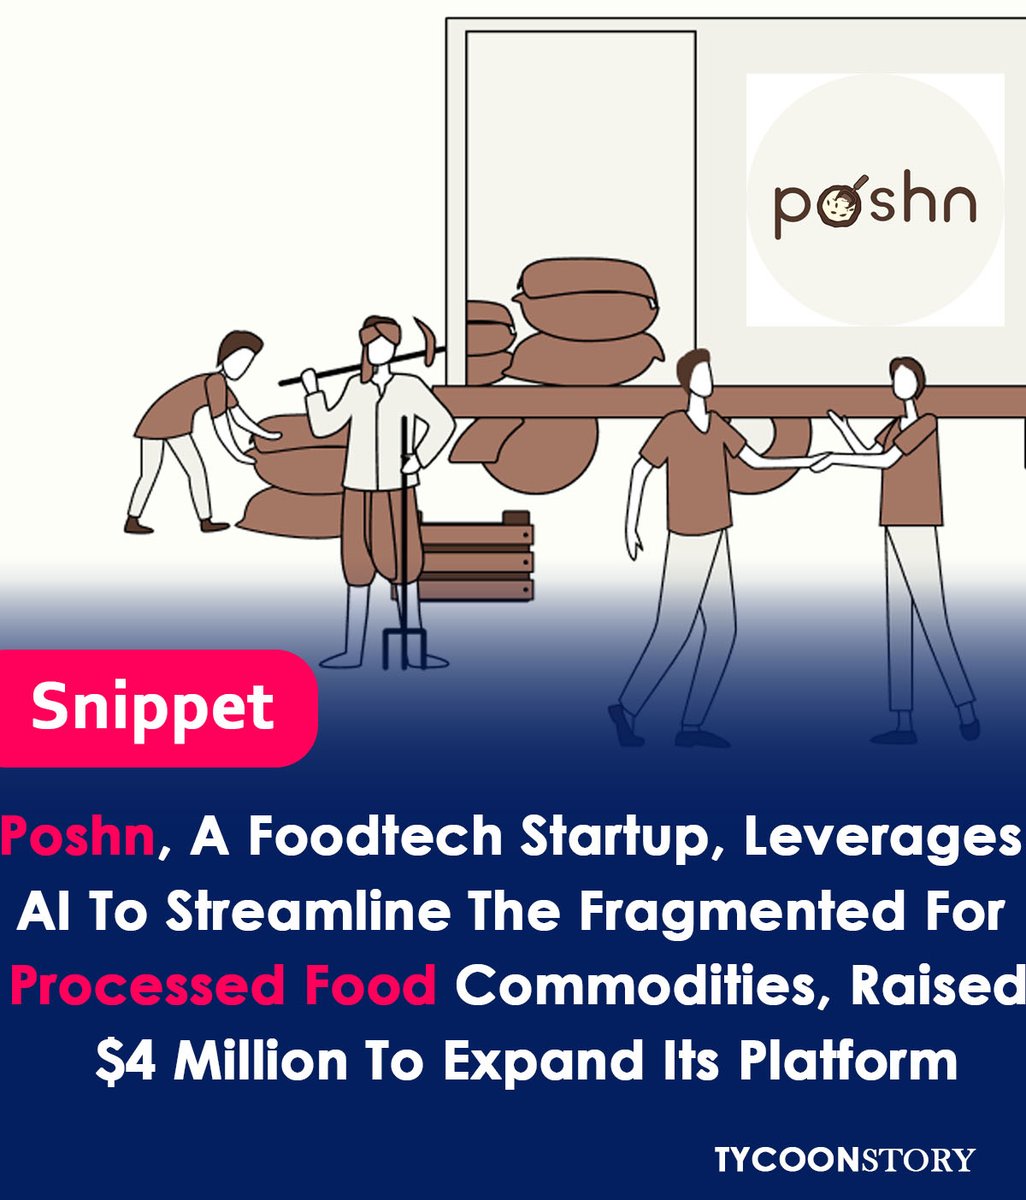 Poshn, raised $4M to expand its platform and enter Southeast Asia and the Middle East.
#FoodTech #StartupFunding #PreSeriesA #SeedRound #DebtFunding #VentureCapital #BusinessExpansion #AIAlgorithm #Marketplace #Commodities #Wholesale #Export #Import #food poshn.co